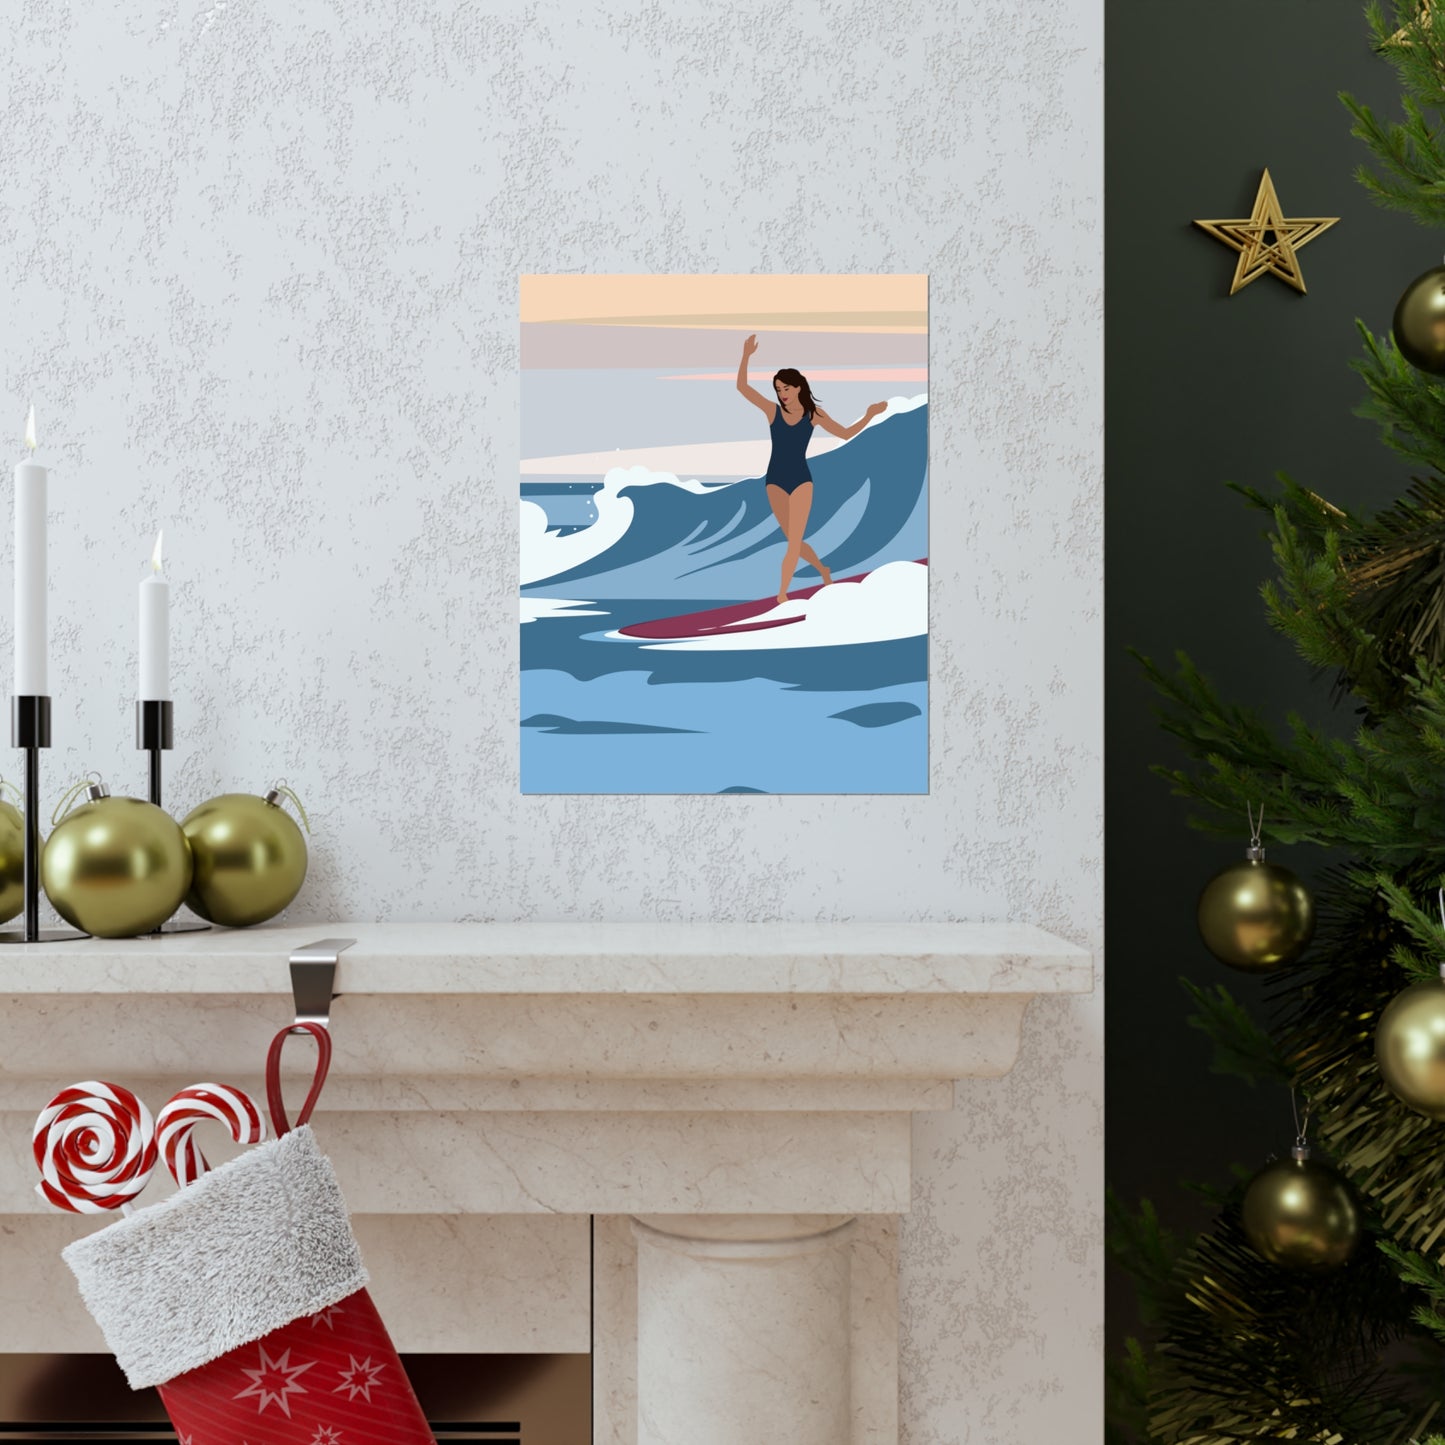 Serenity by the Sea Woman Surfing Art Classic Premium Matte Vertical Posters